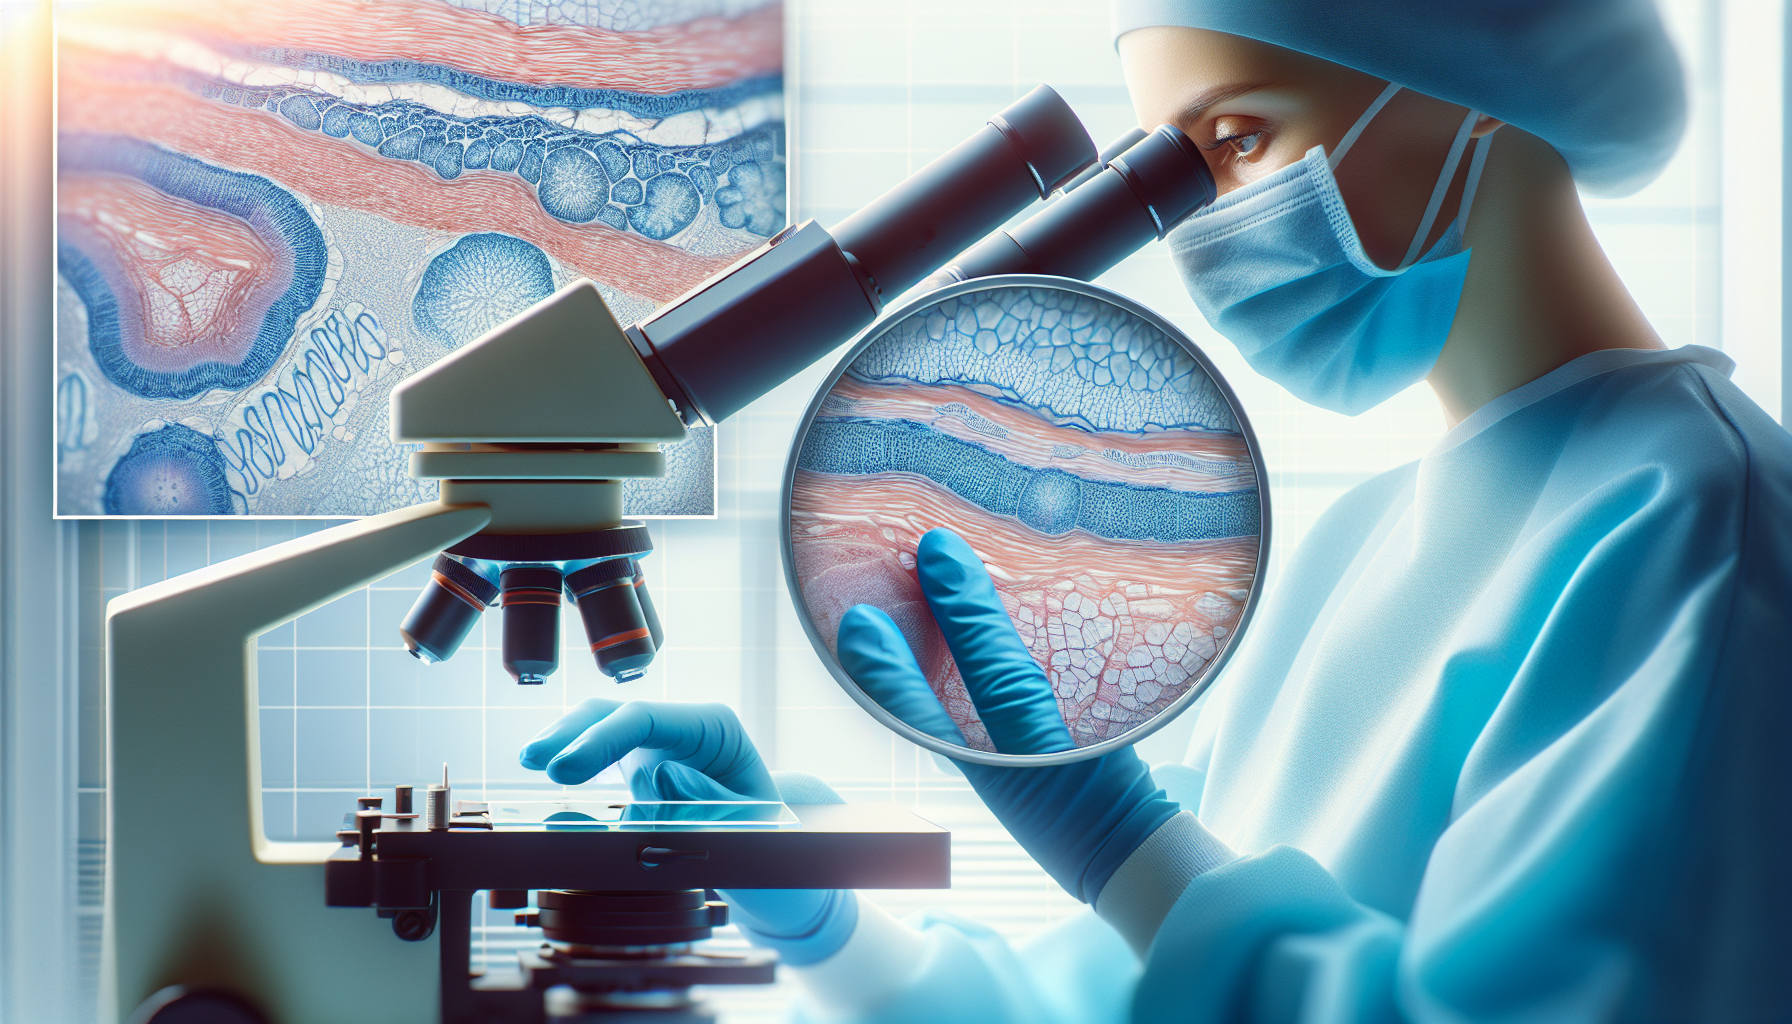 Illustration of Mohs surgery tissue removal and microscopic analysis